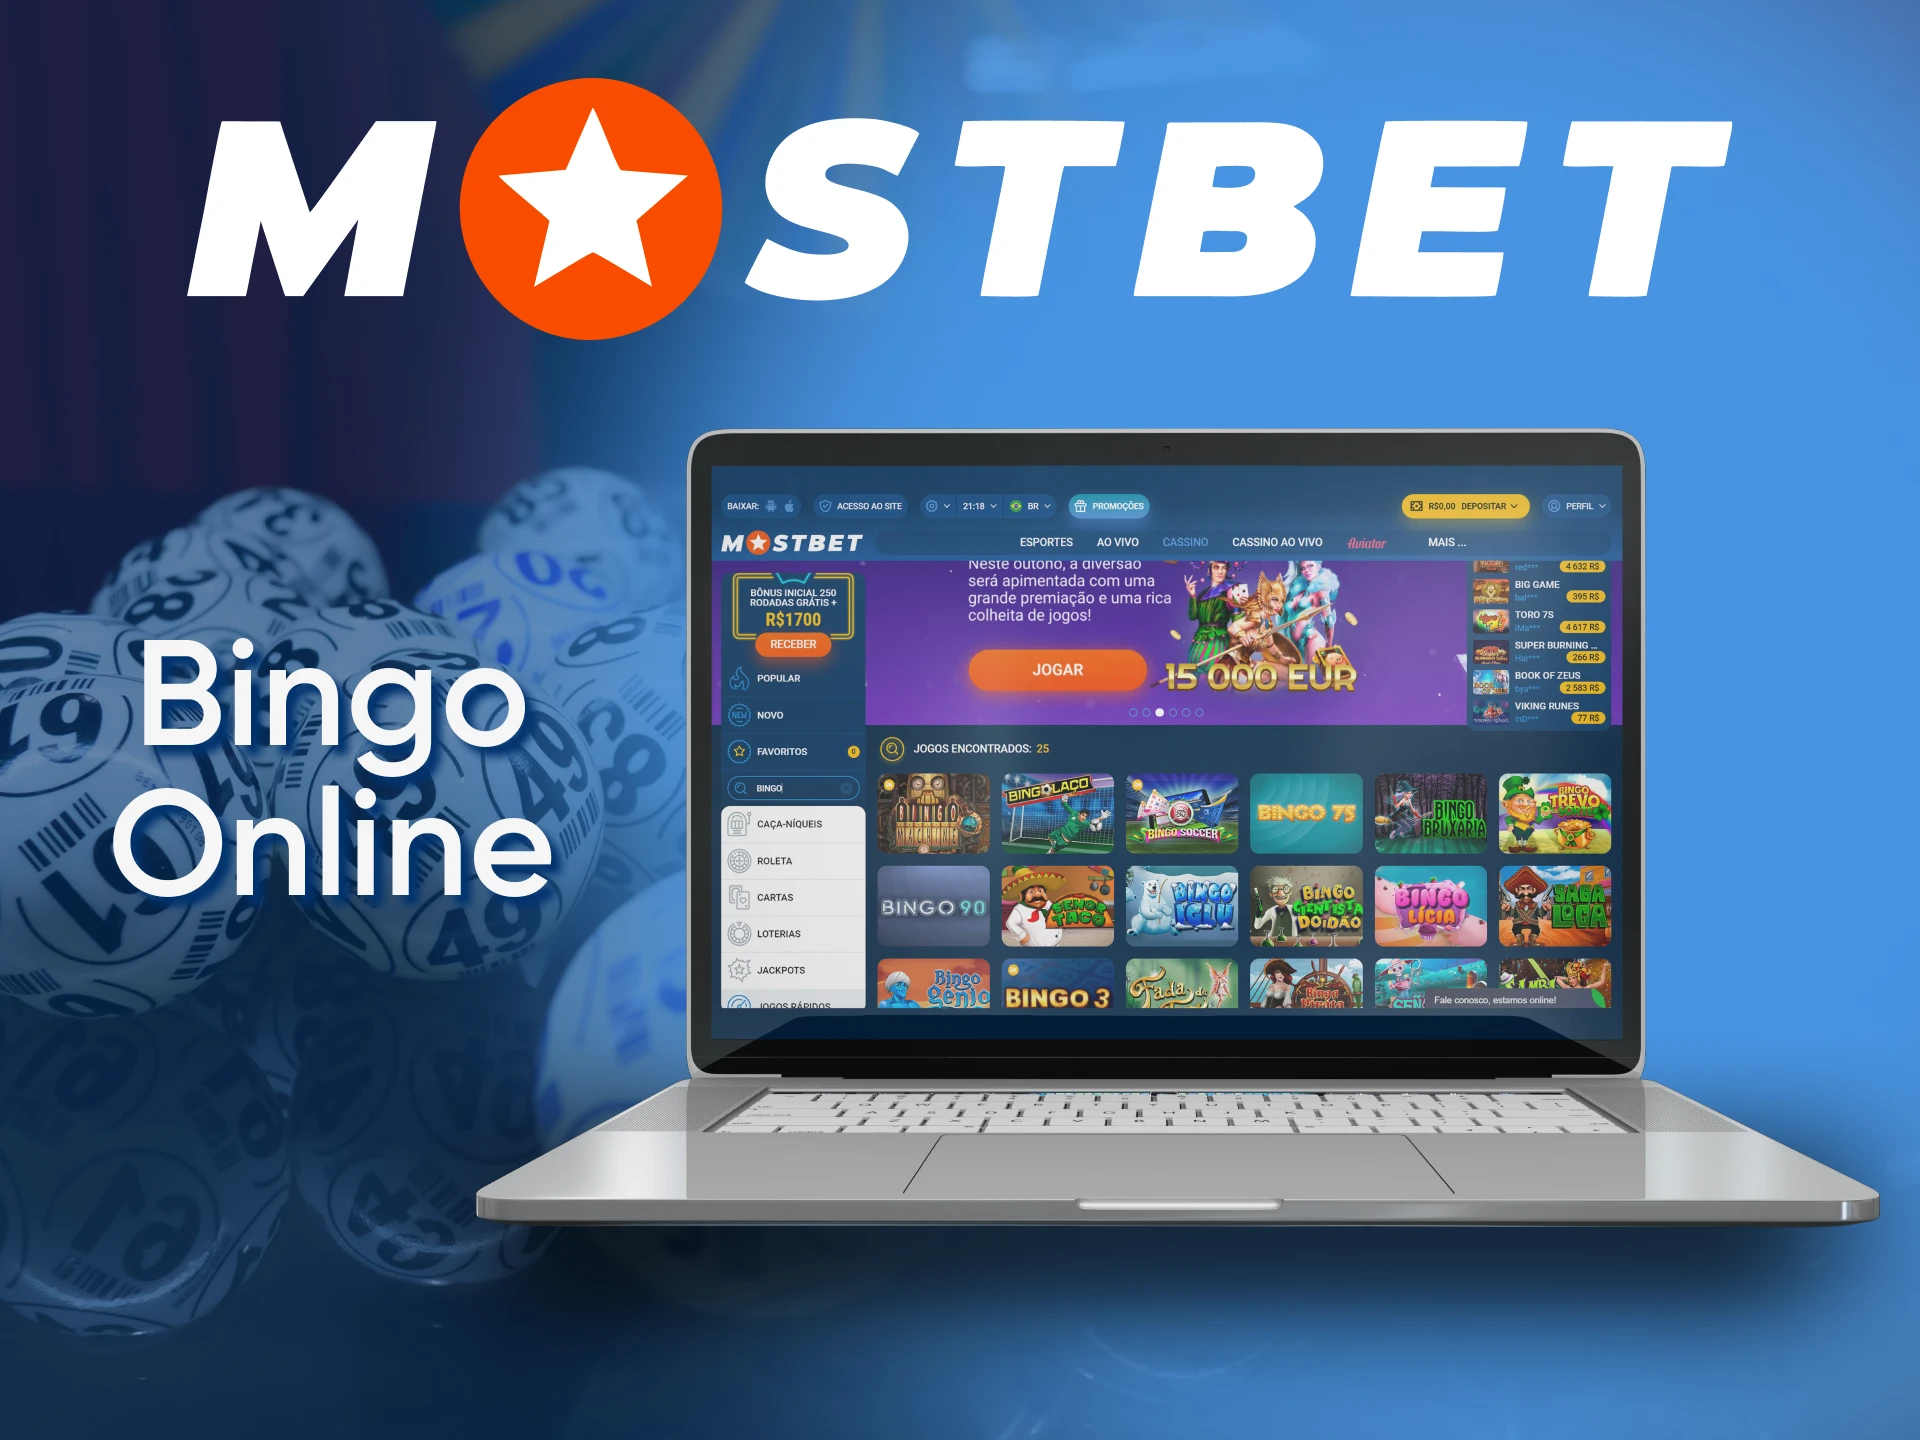 Play and bet with Mostbet on bingo.